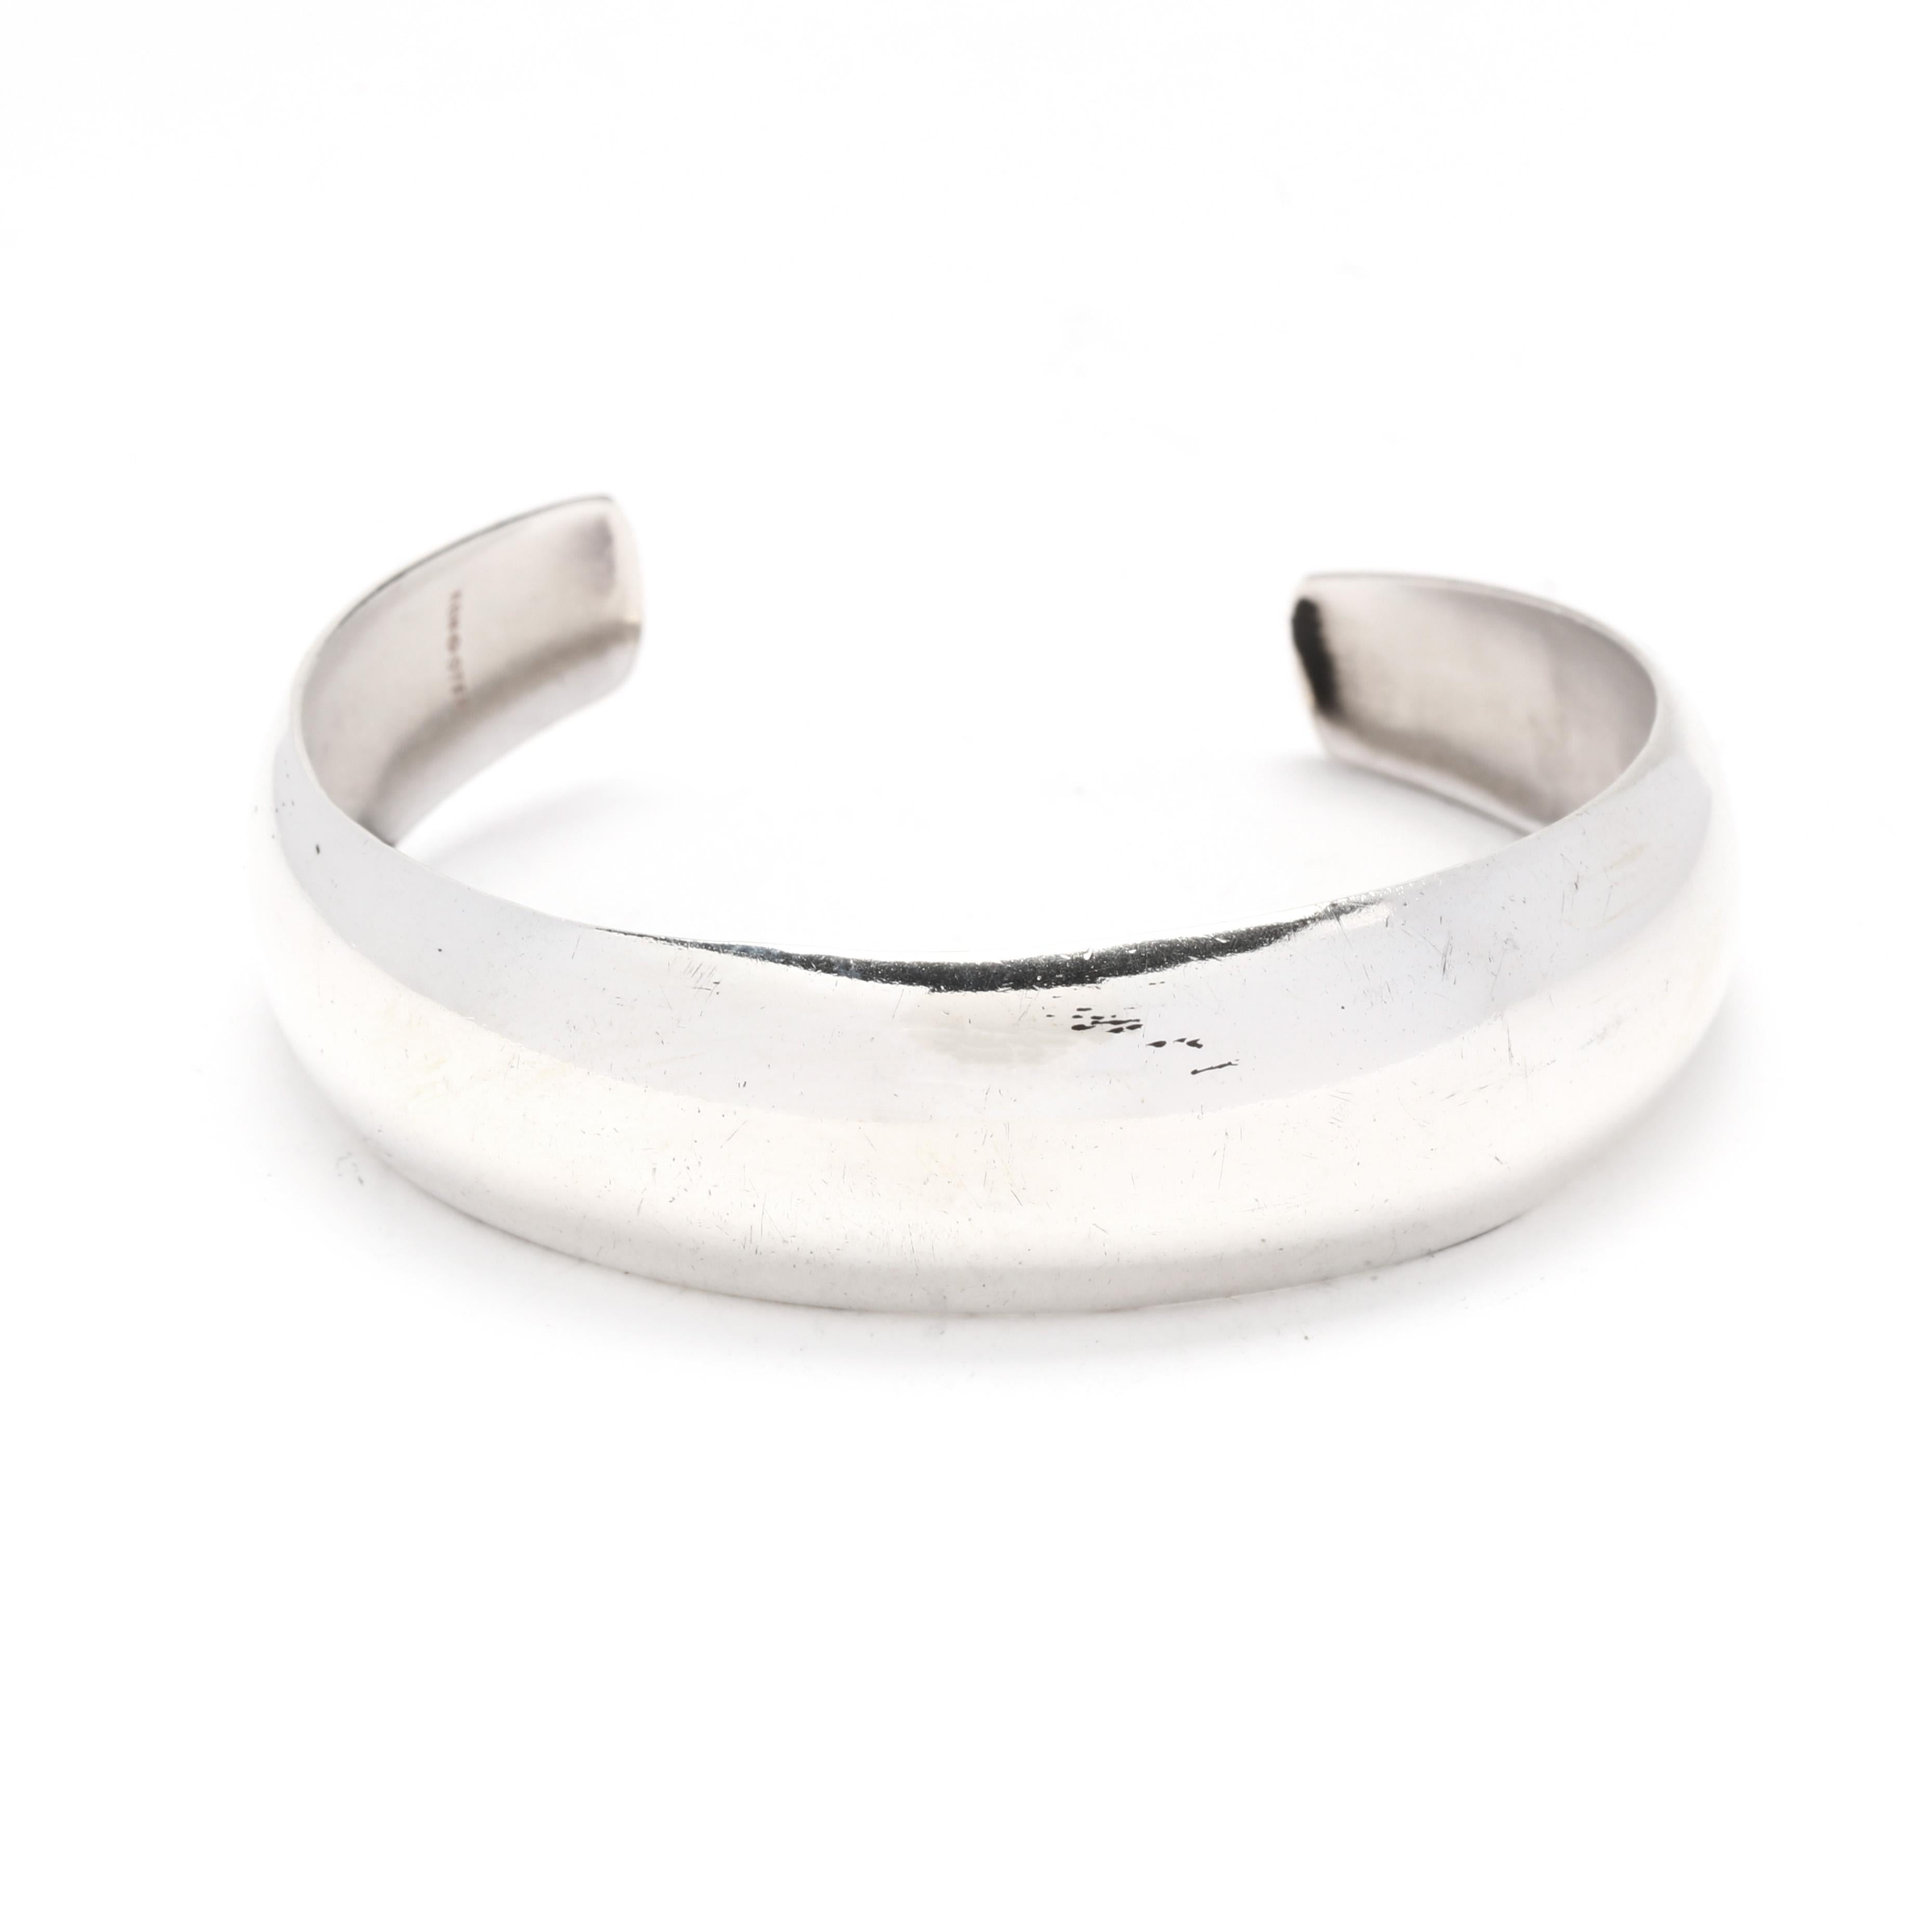 A vintage sterling silver polished rounded cuff bracelet.  This wide cuff bracelet has a rounded form with a tapering shape.  It is stamped KBN Ster. 

Length: 6.5 inches with a 1-inch opening

Width: .5 inches

Weight: 8.4 dwt / 13.1 grams

Metal: